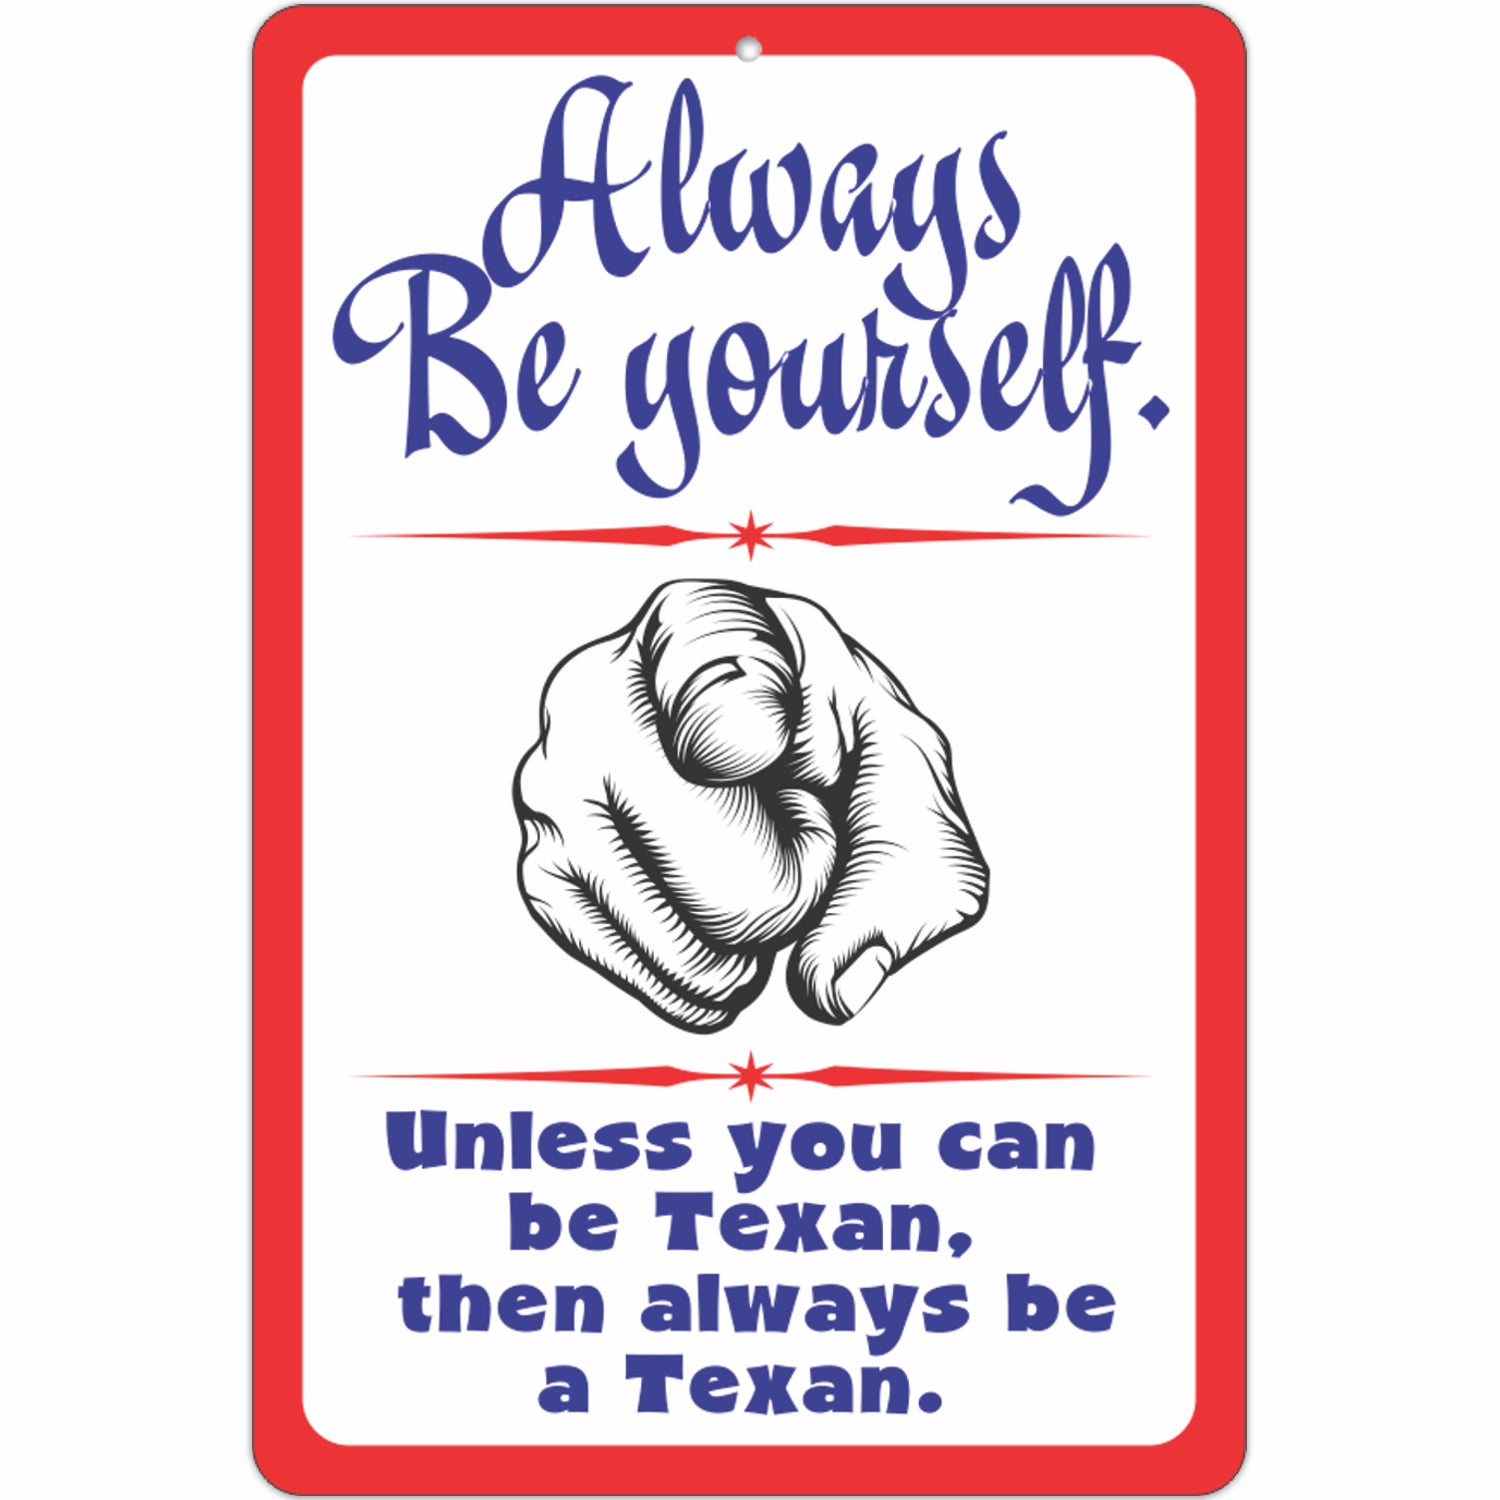 Always be Yourself. Unless You can be Texan, Then Always be a Texan.